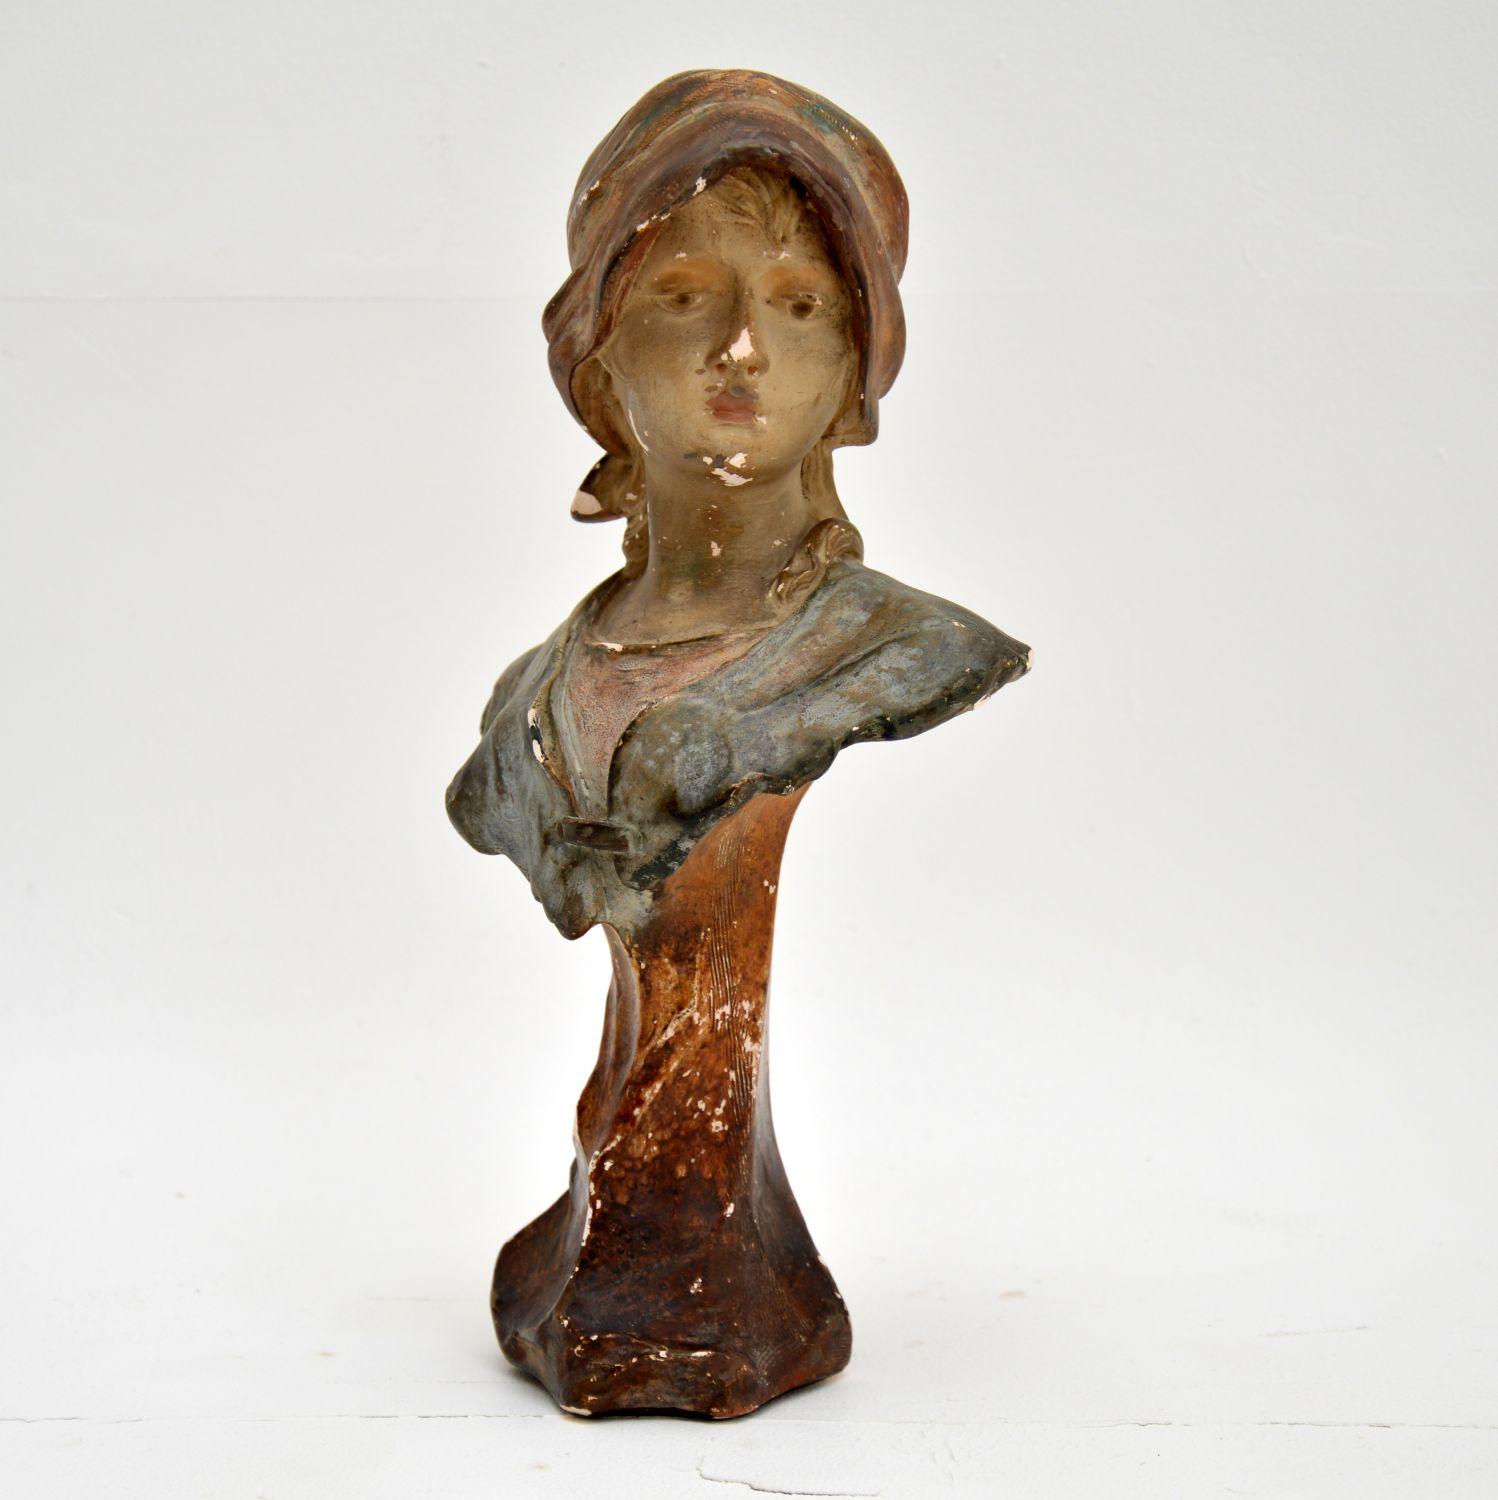 A stunning antique bust from the Art Nouveau period. We think this is French and dates from around the 1890-1900 period.

It depicts a young girl in a shawl, it is signed and numbered on the back : Hochock 361

The colours are beautiful, this is